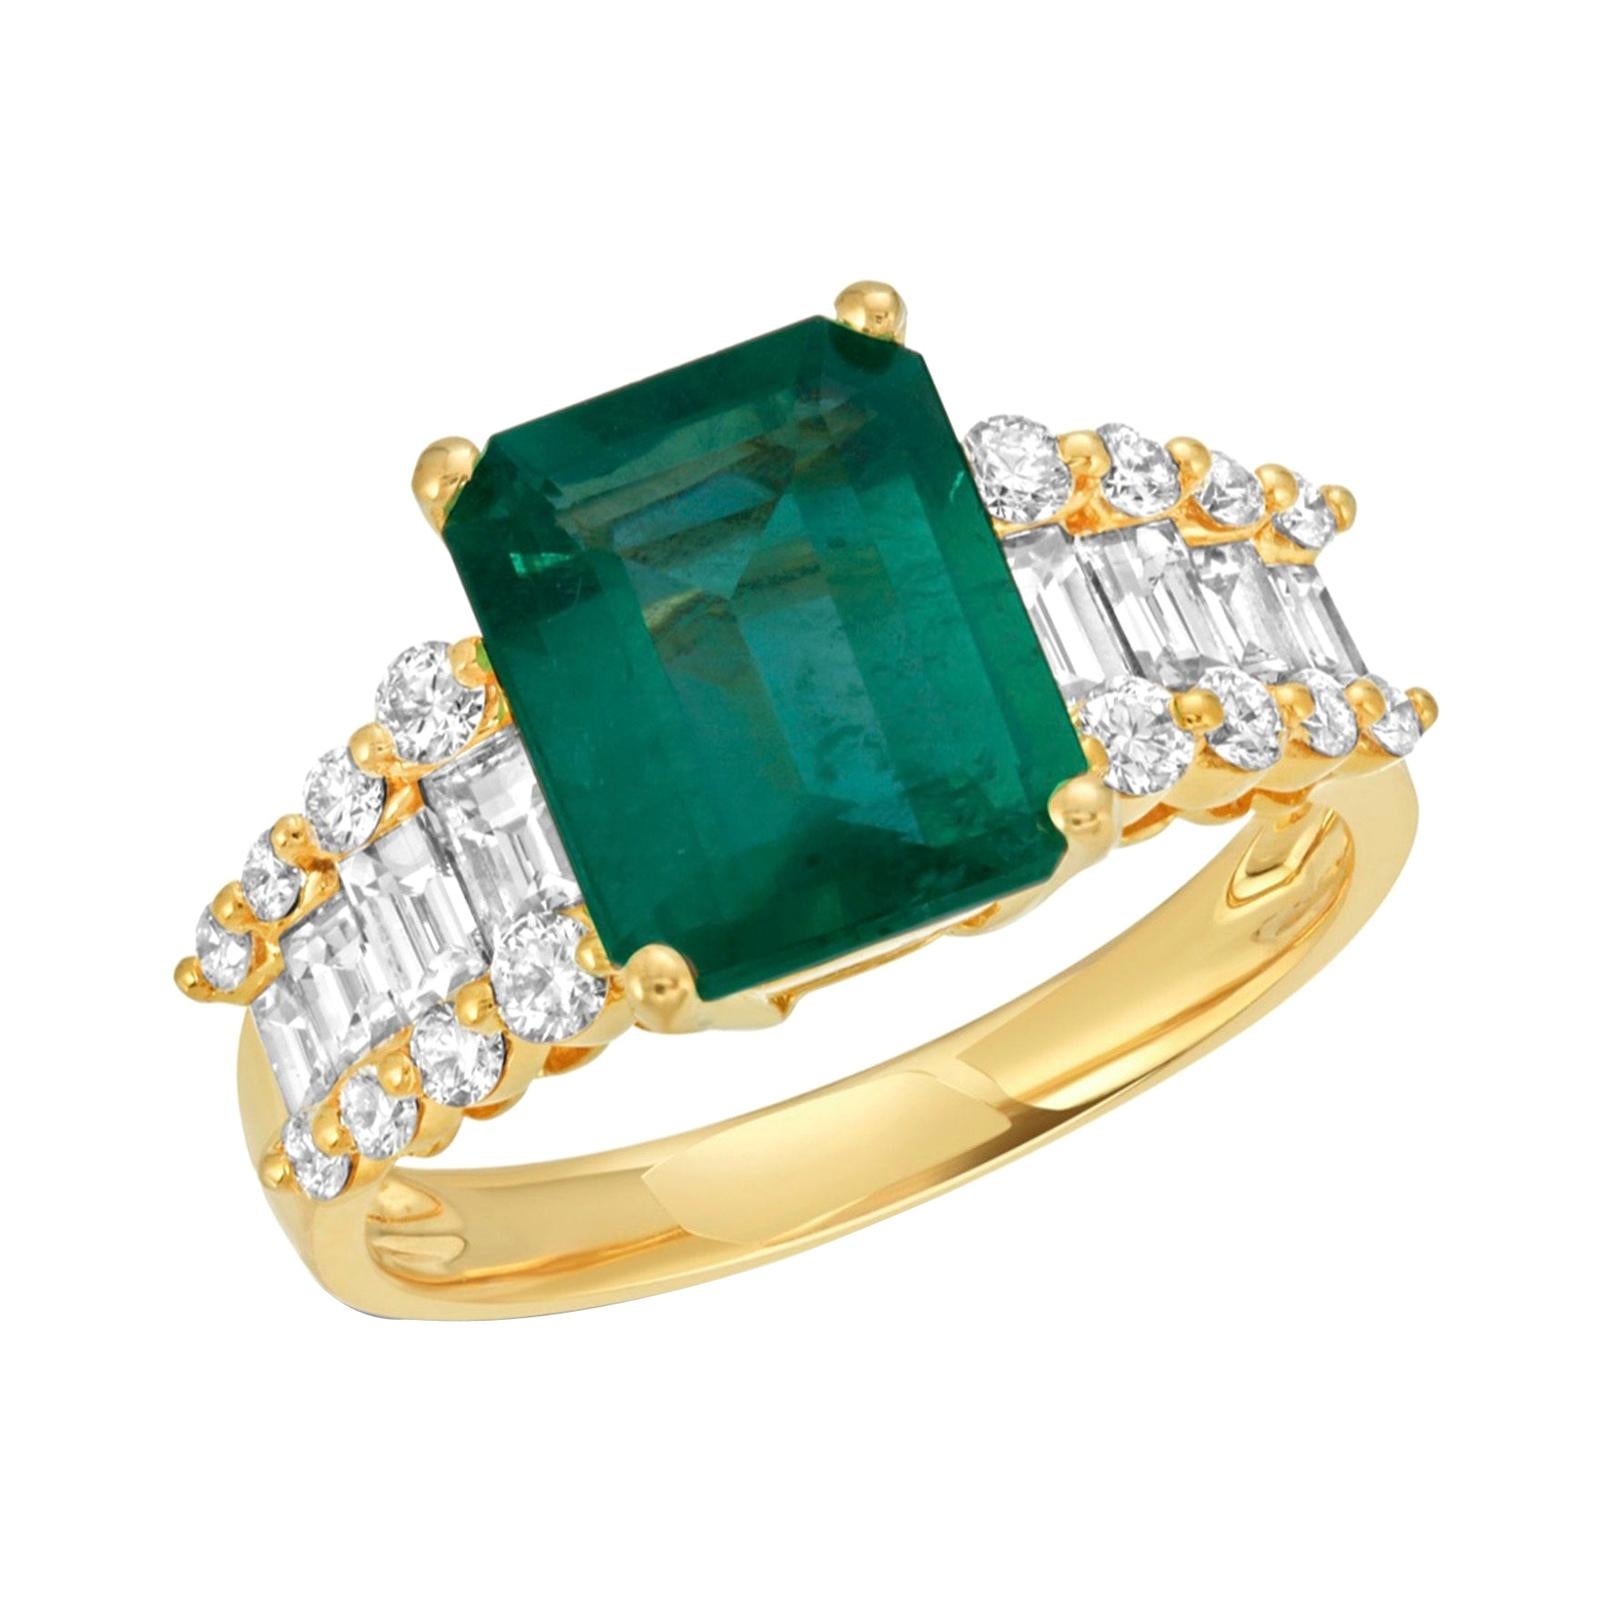 2.58 Ct Zambian Emerald & 1.03 Ct Diamonds in 18k Yellow Gold Engagement Ring For Sale